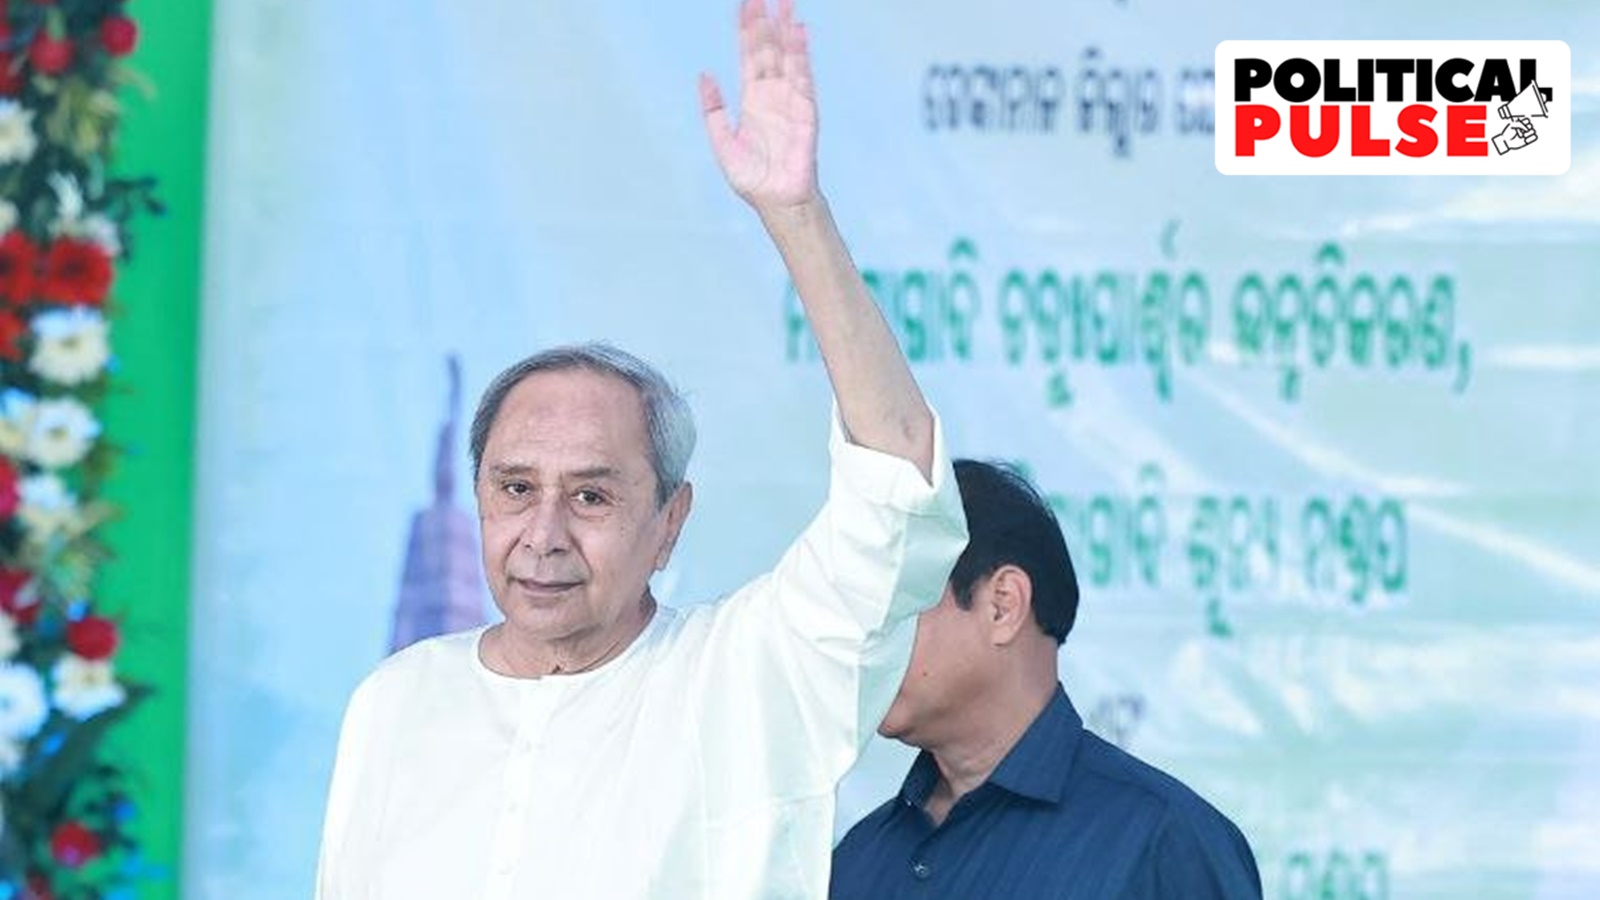 Elections nearing, BJD pushes 'regional pride' narrative to project 'party  of Odisha' image | Political Pulse News - The Indian Express